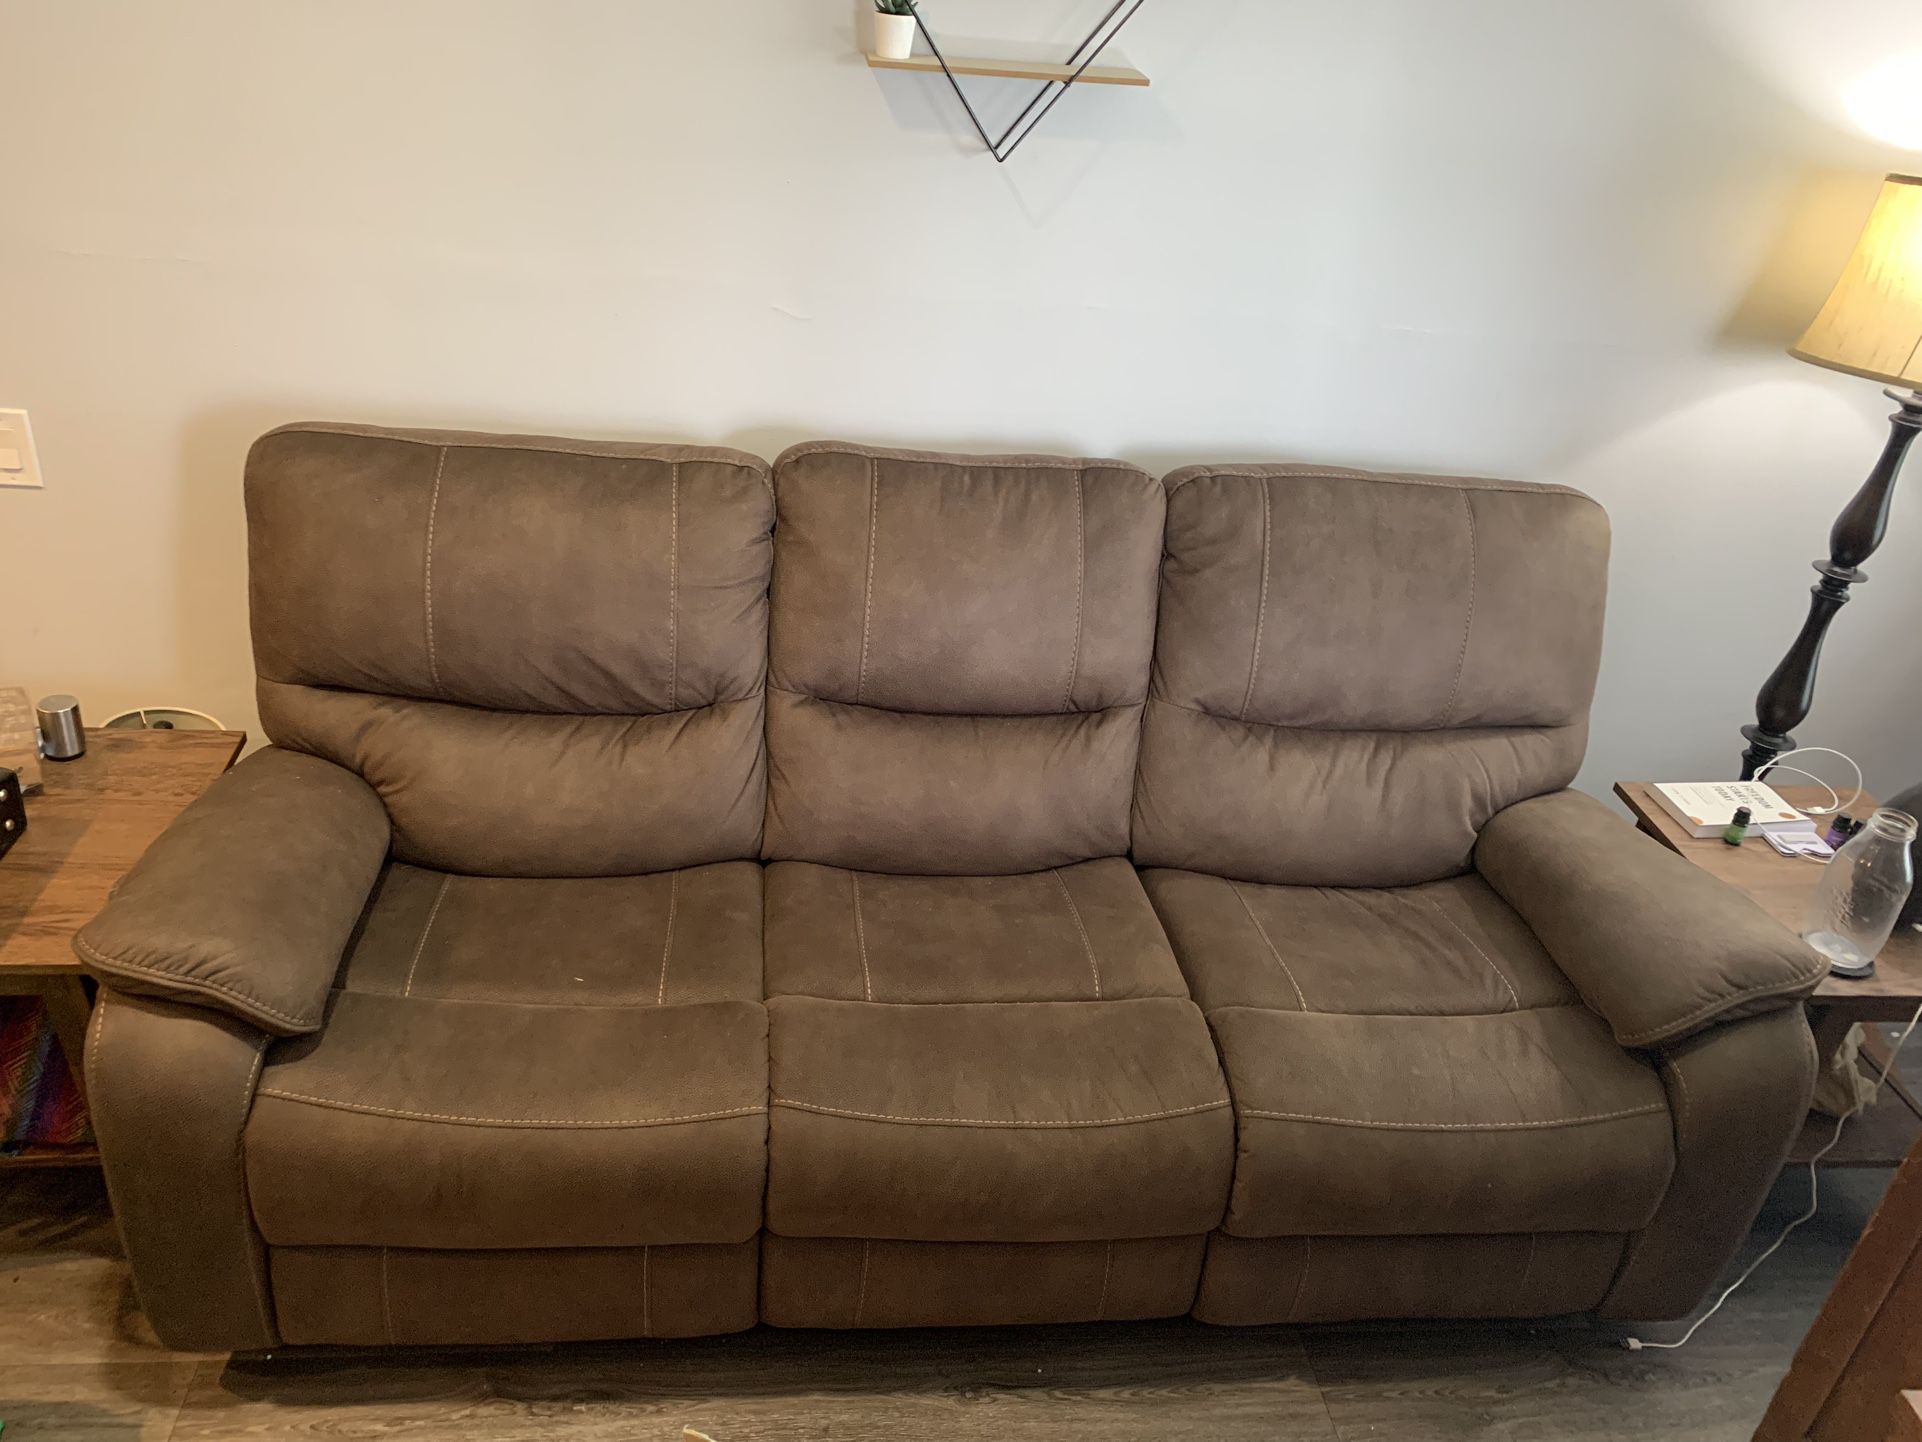 Great Condition - Brown Suede Reclining Couch